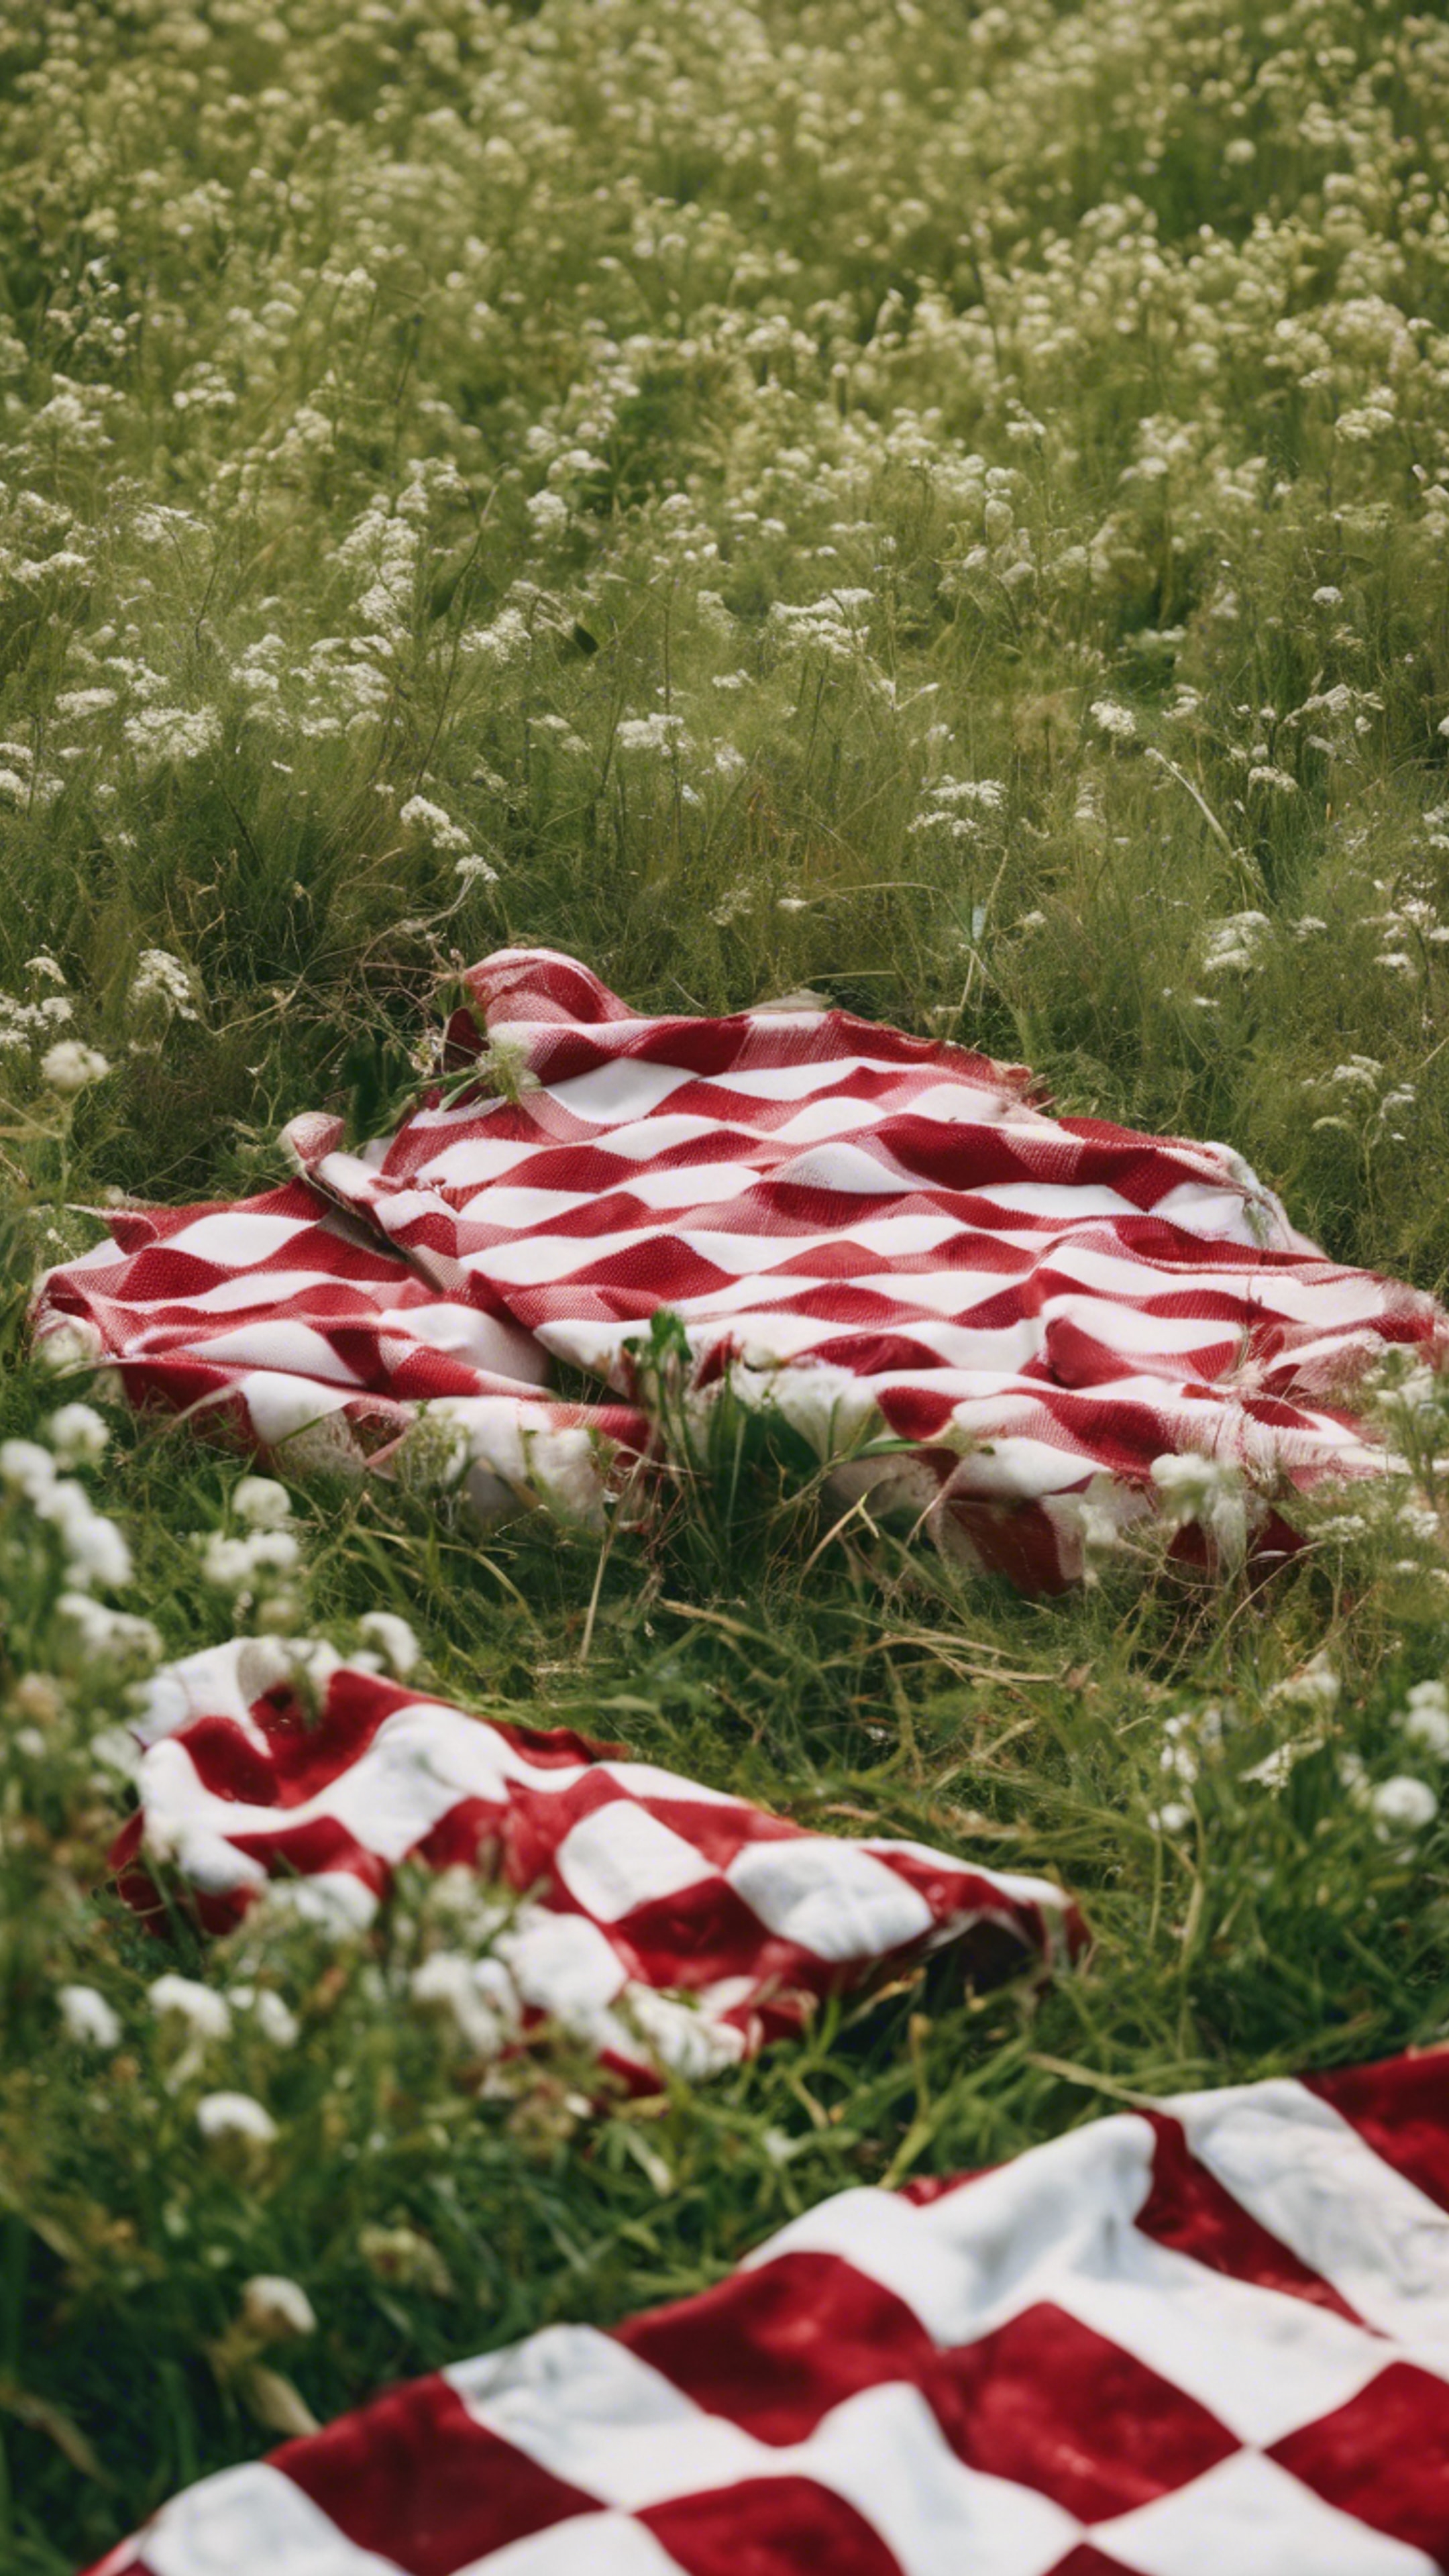 A red and white checkered picnic blanket spread out in a lush green field. Behang[d3f97e971ed8445aa31d]